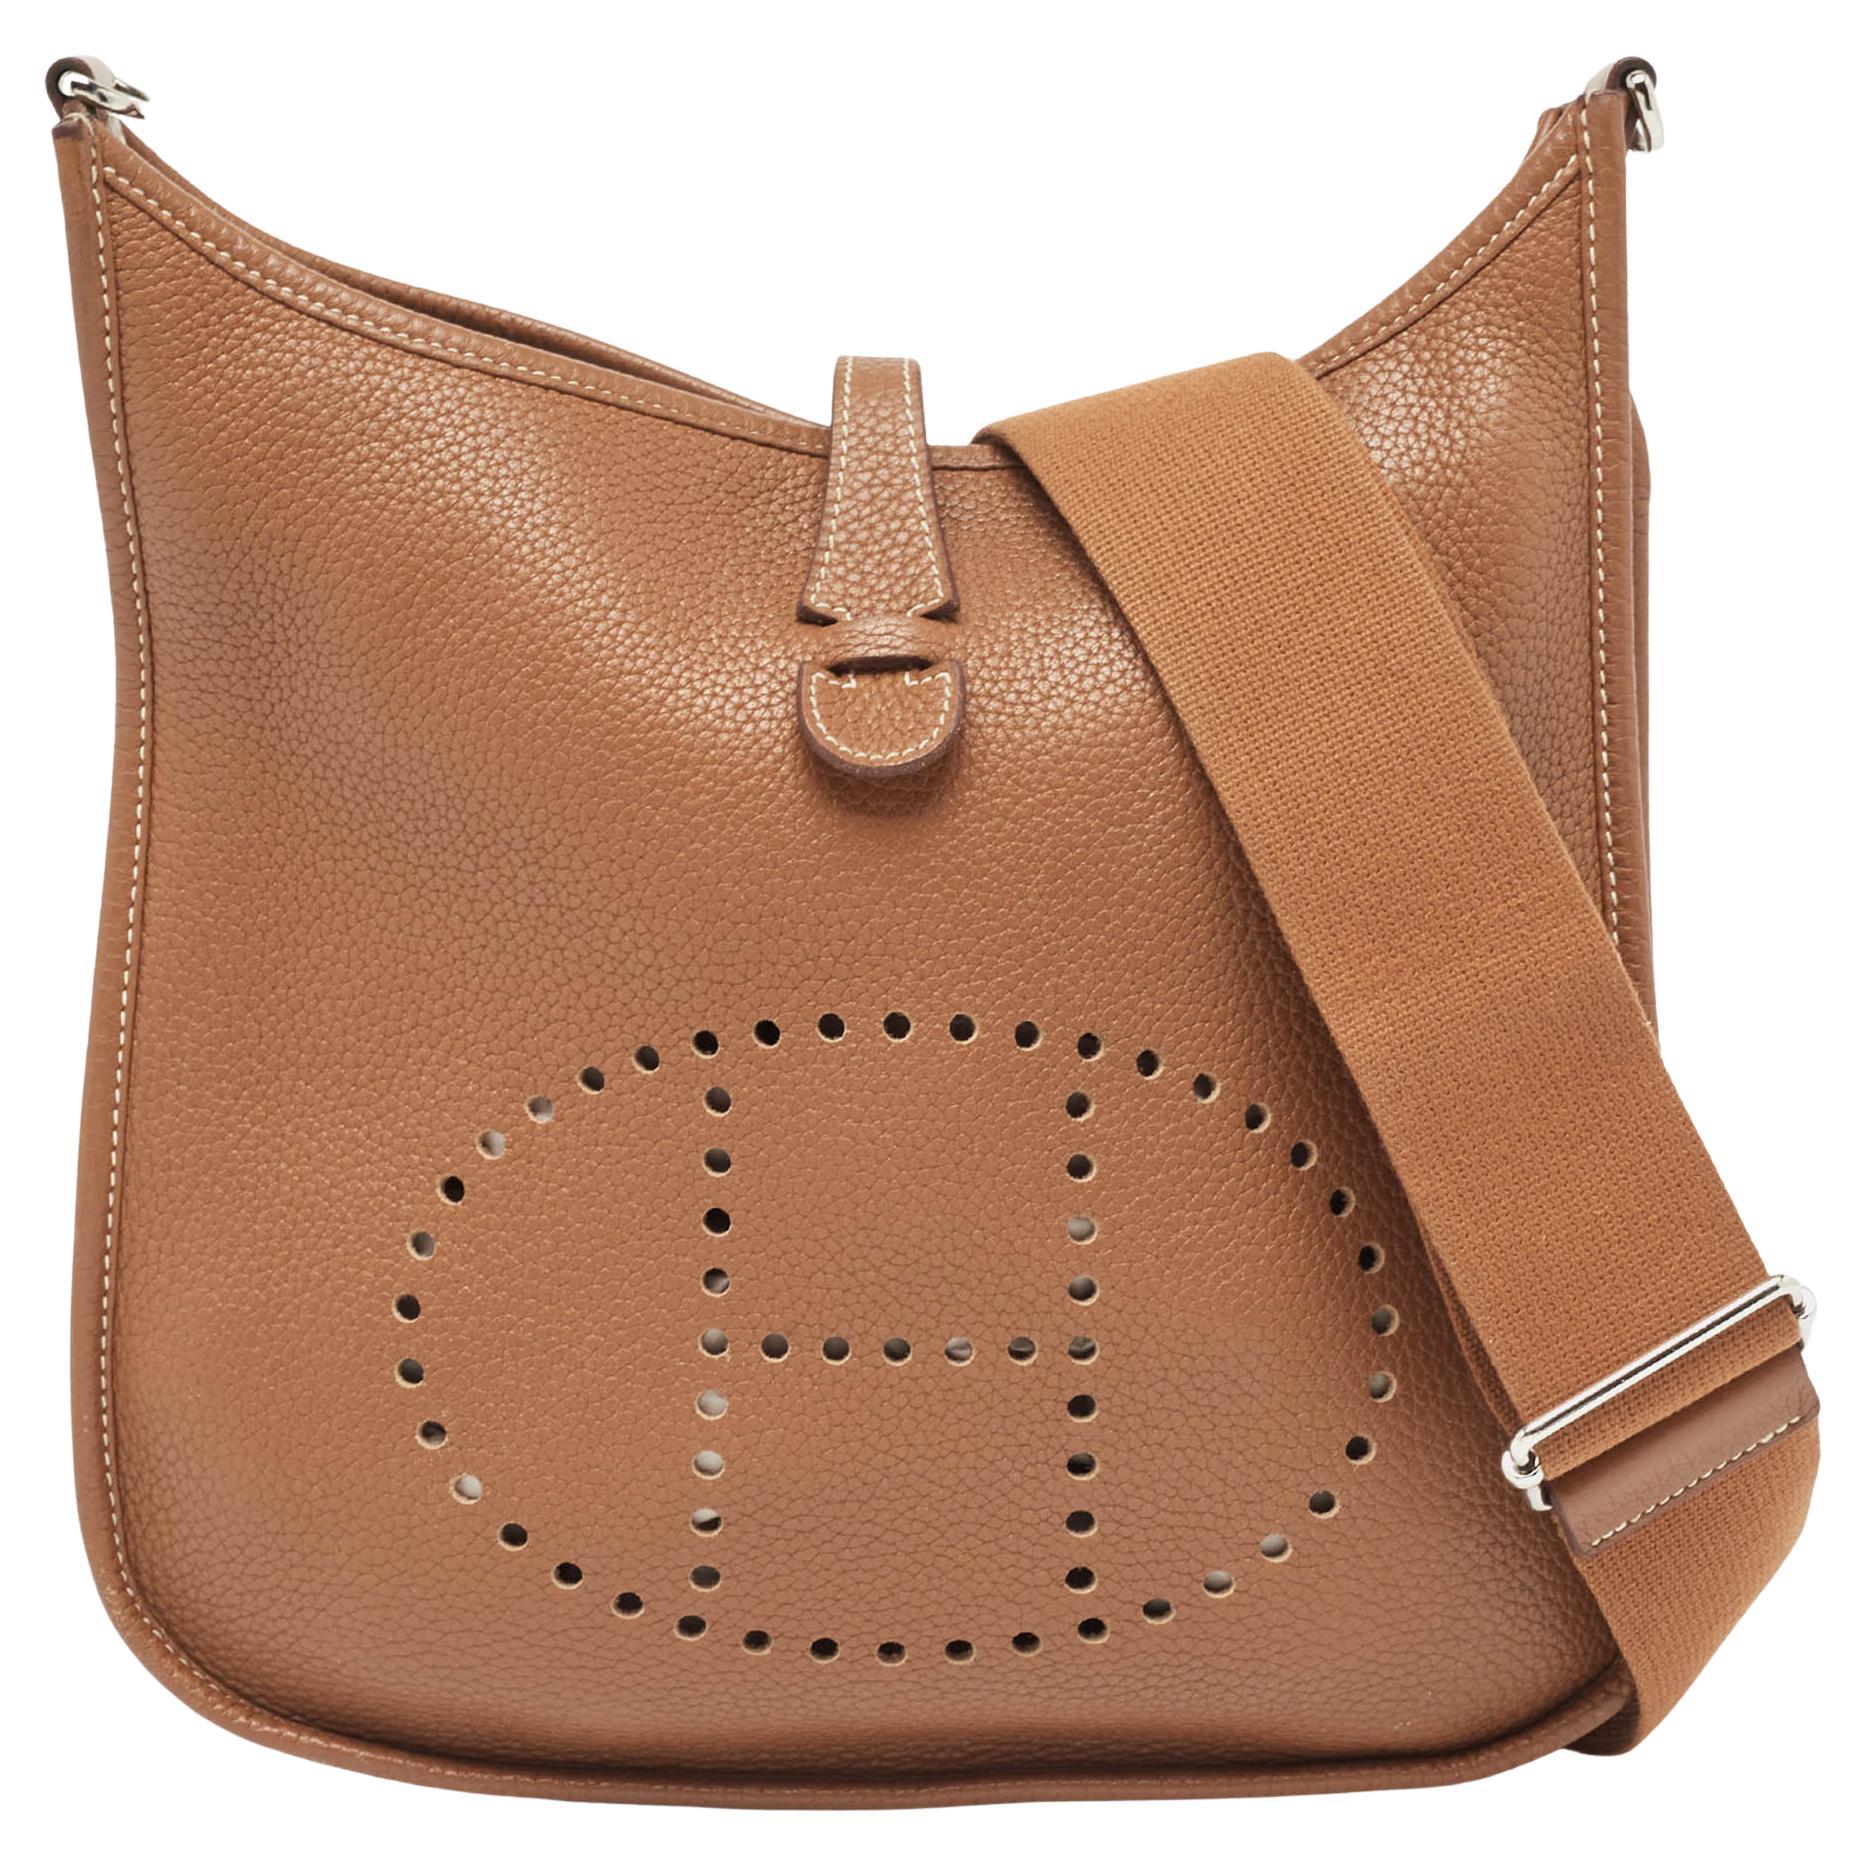 Hermes Gold Taurillon Clemence Leather Evelyne III PM Bag For Sale